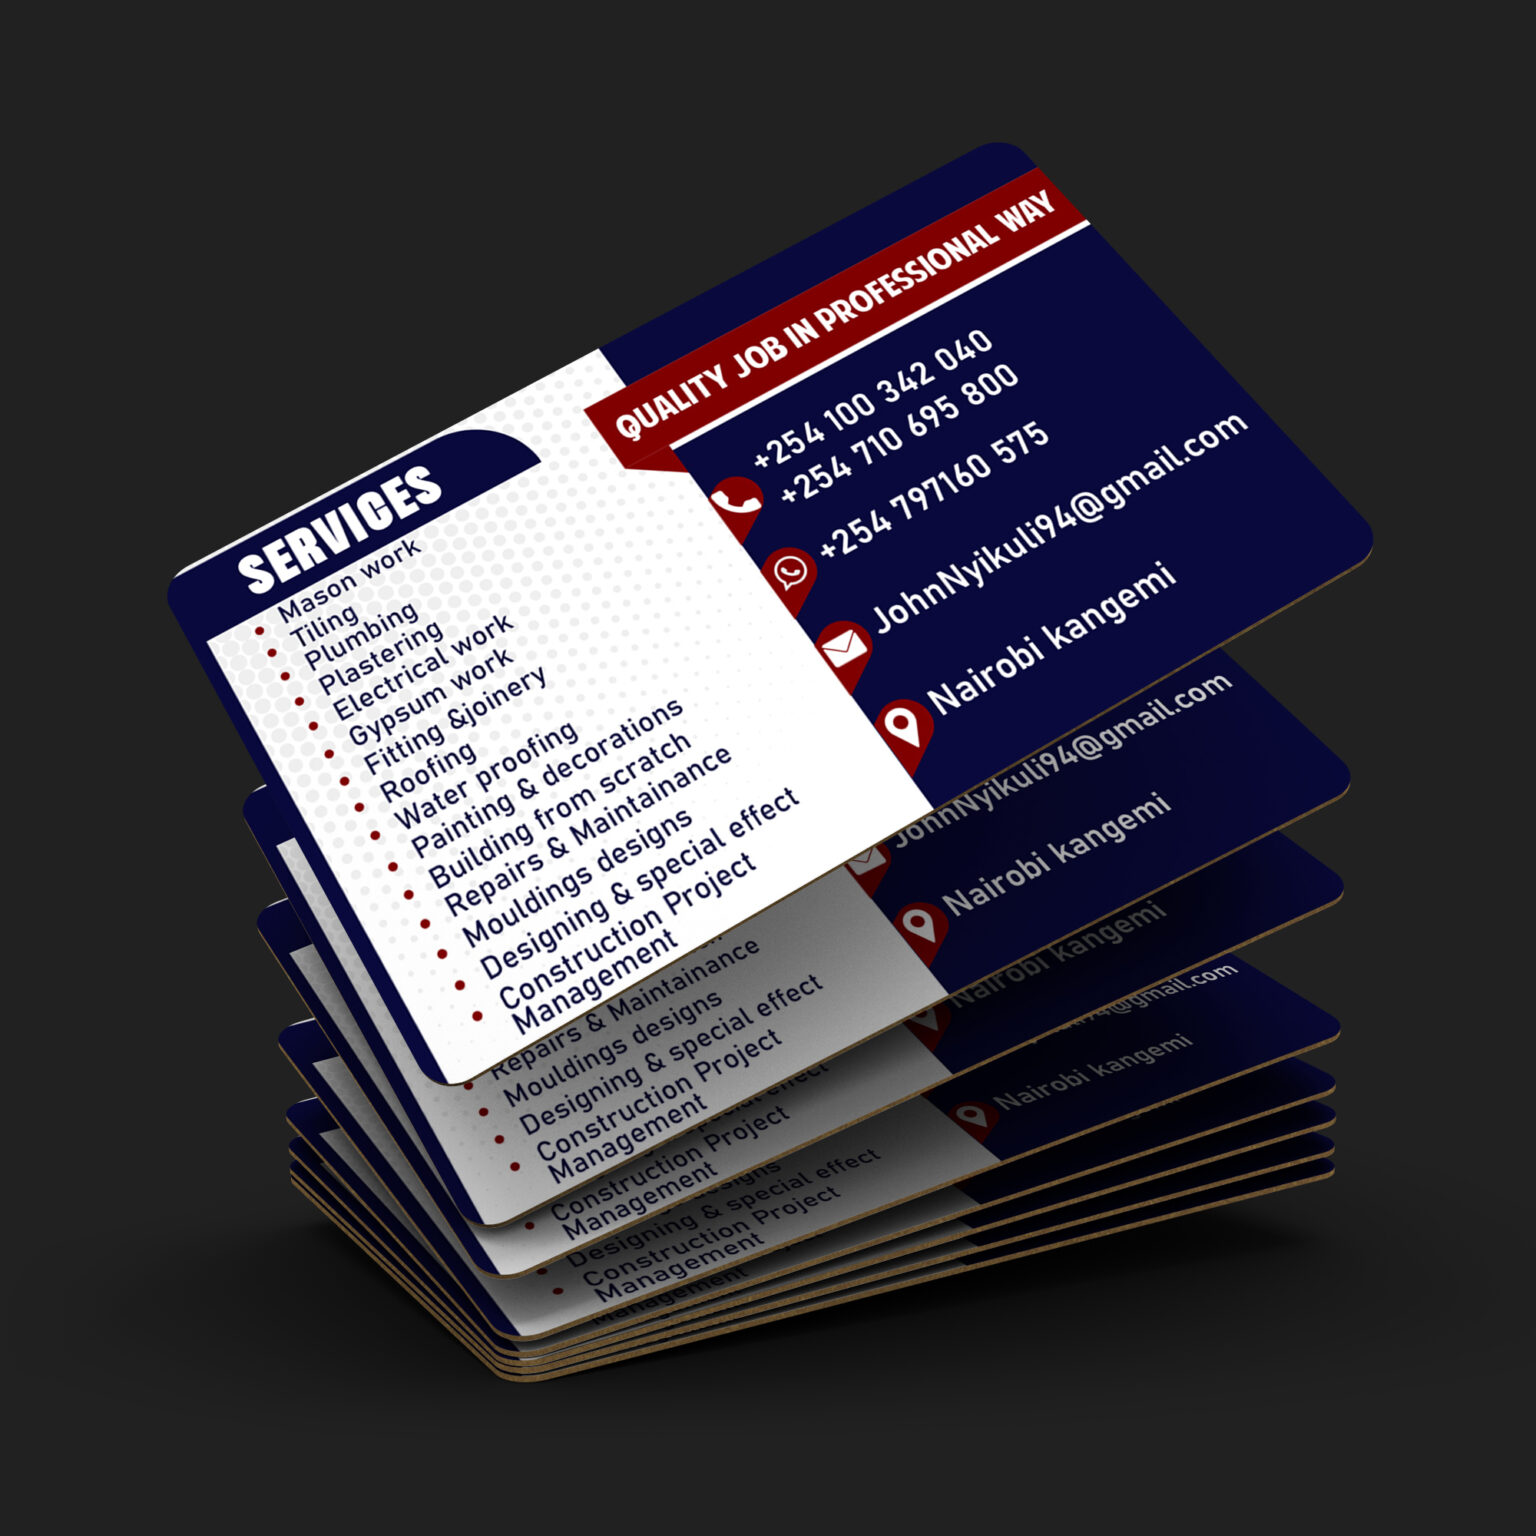 Right business card2-02